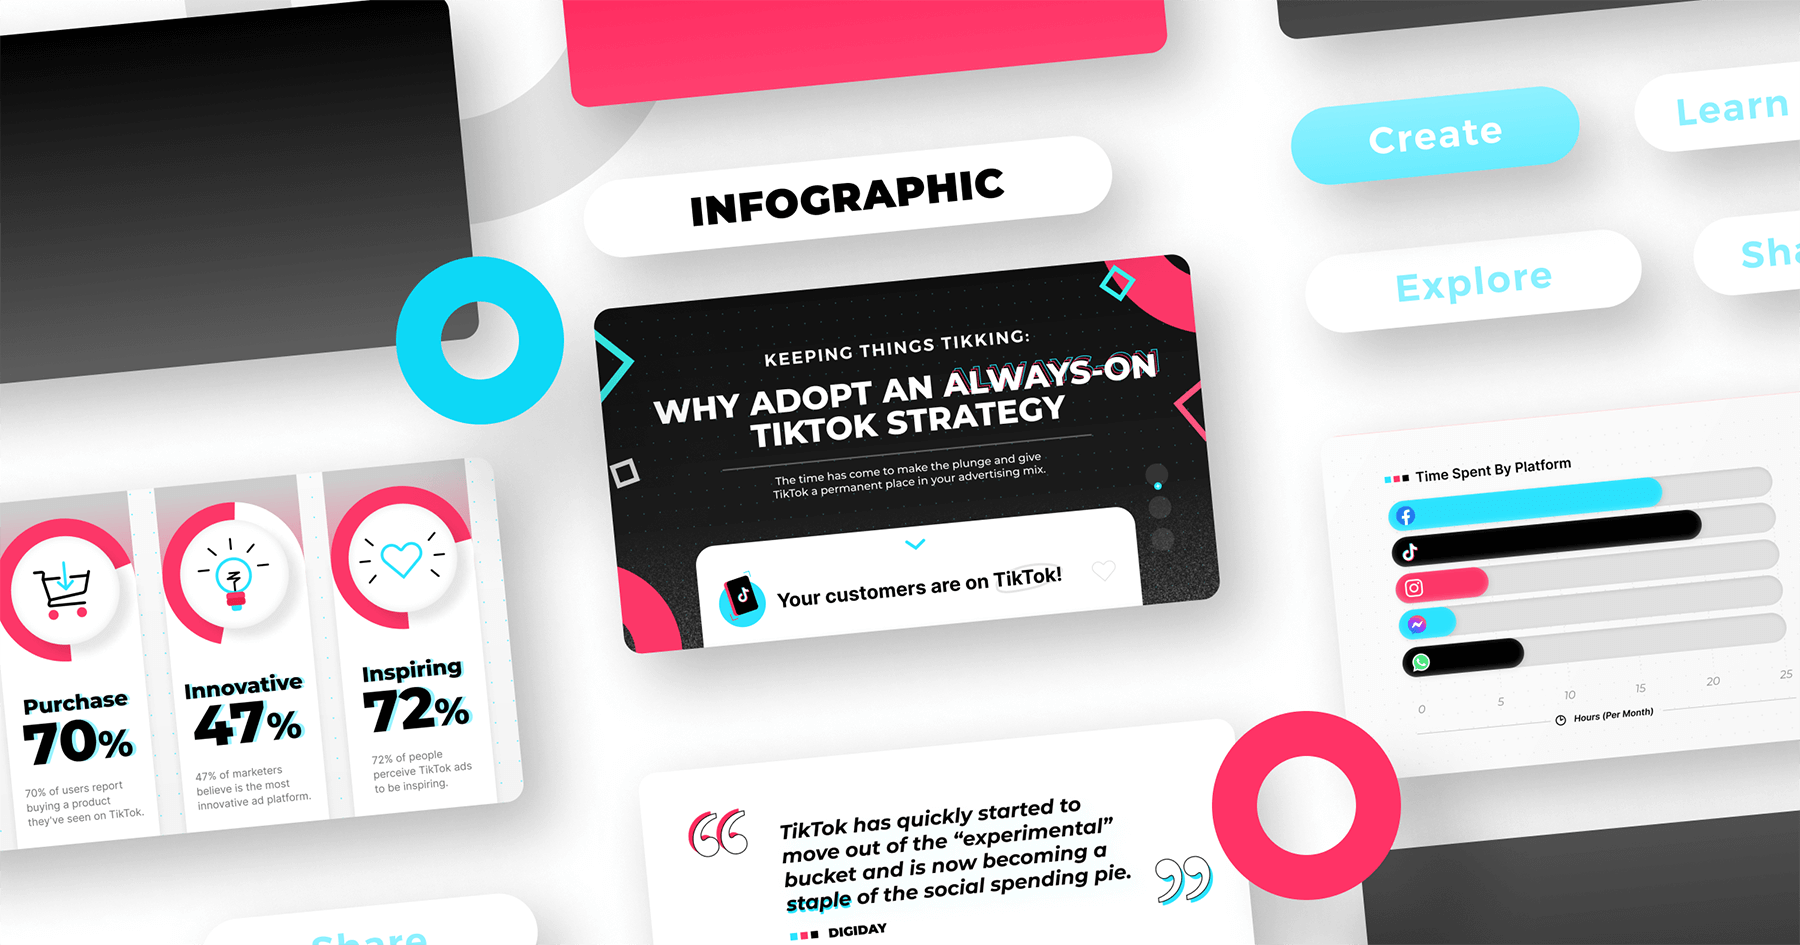 Keeping Things Ticking: Why Adopt An Always-On TikTok Strategy